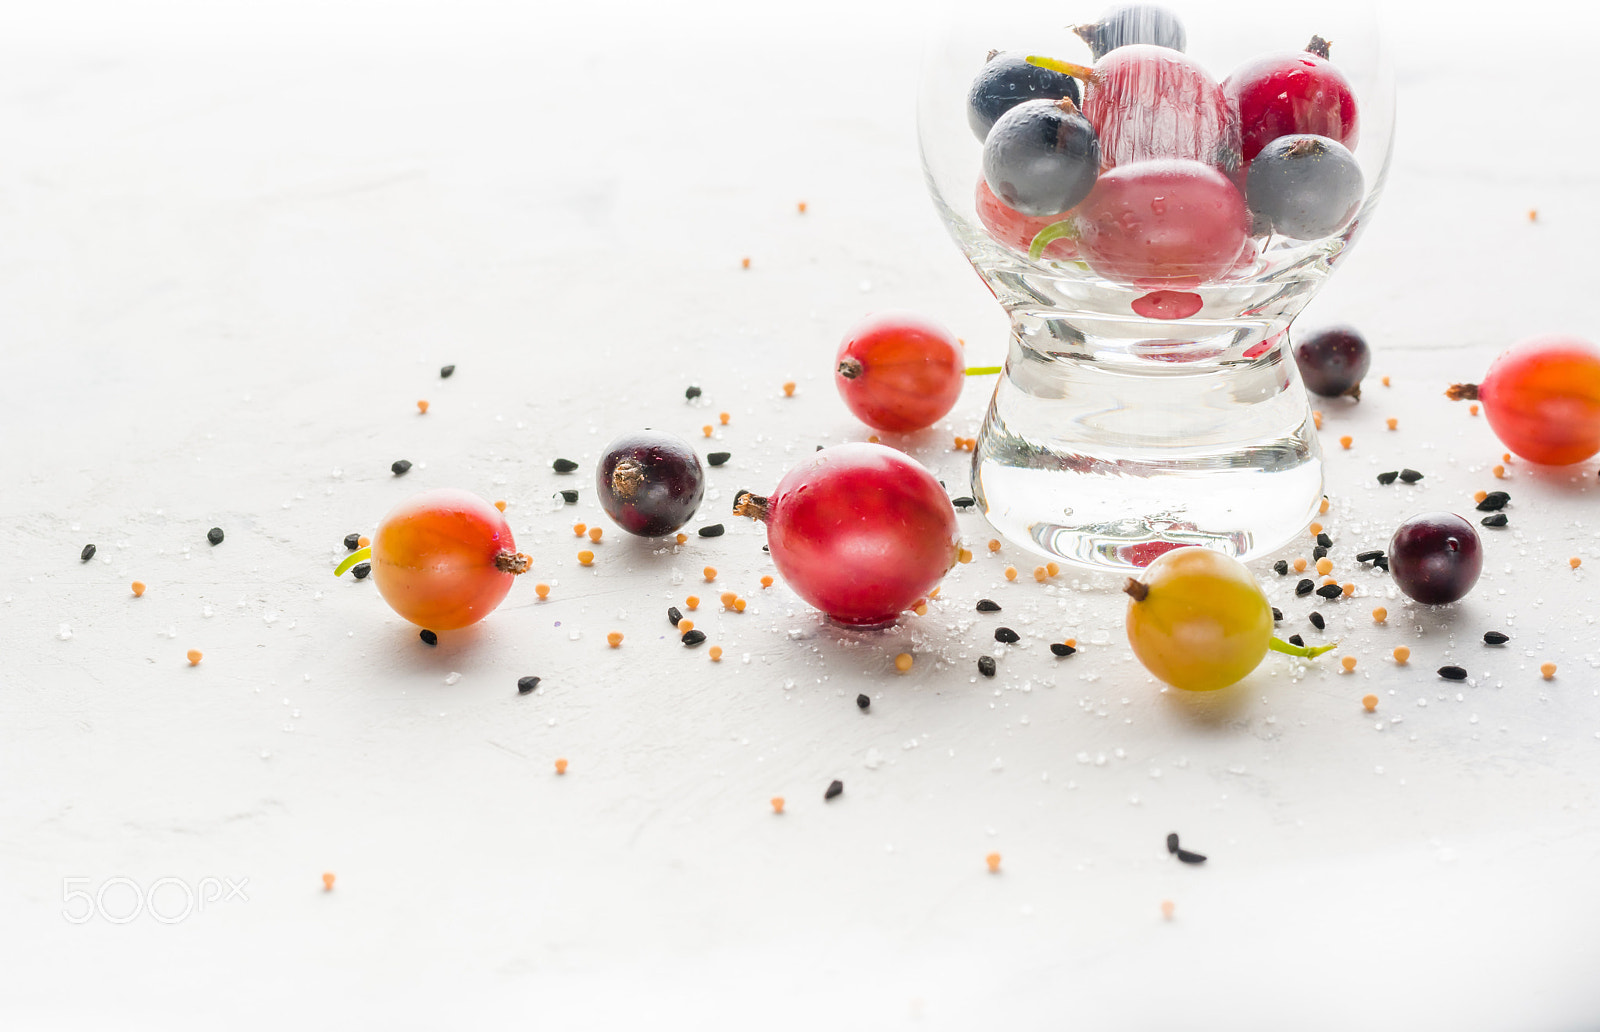 Nikon D7100 sample photo. Gooseberries and black currants on a white background in a transparent glass. photography